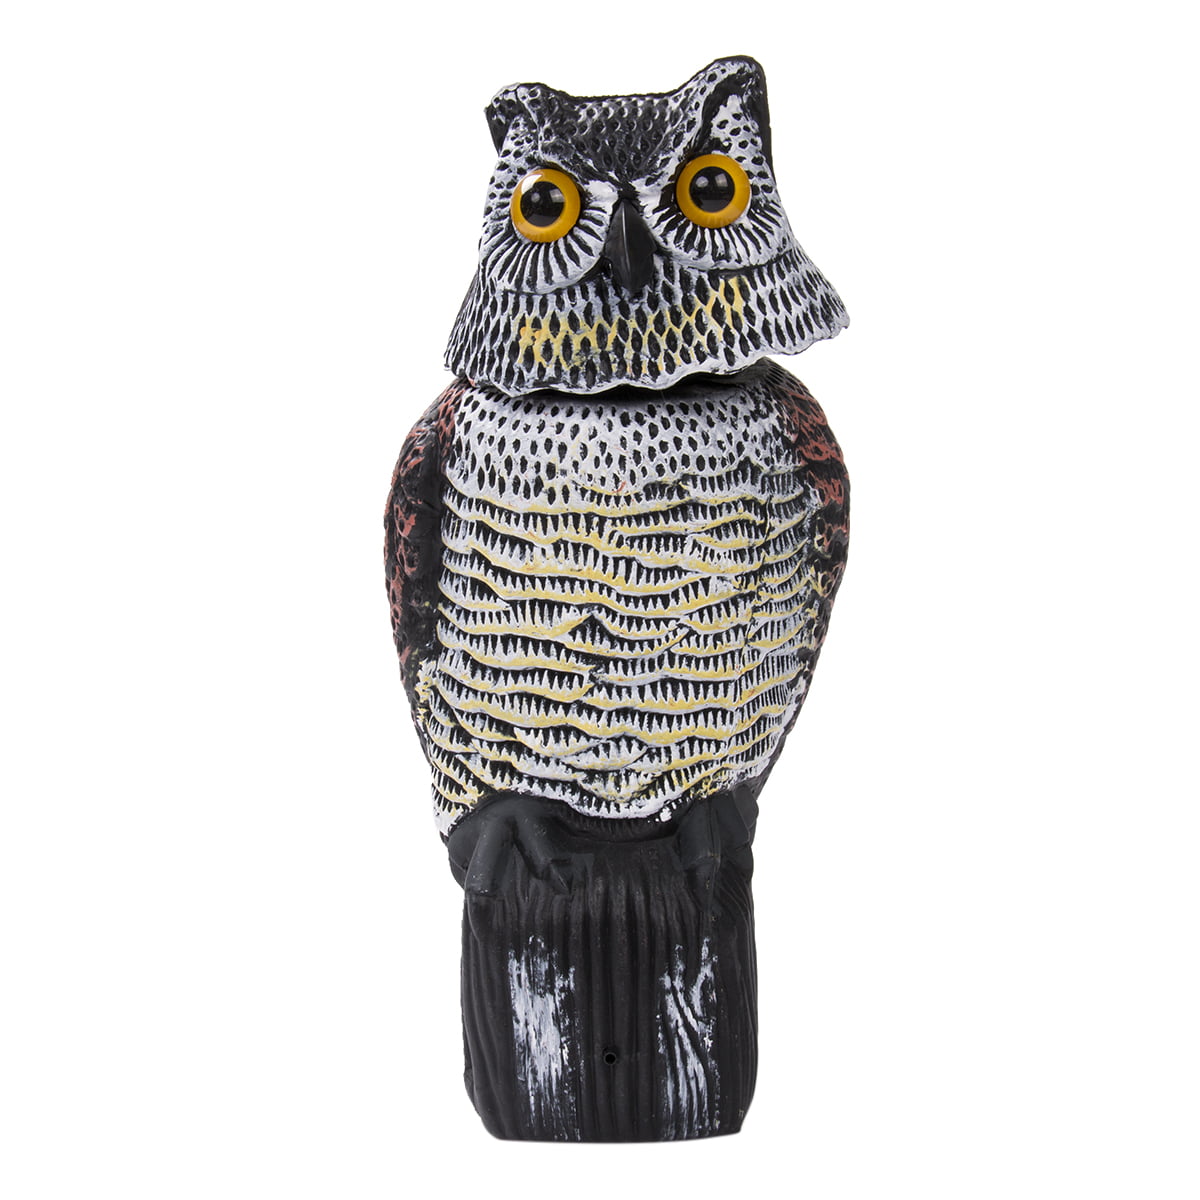 Details about   Realistic Bird Scarer Rotating Head Sound Owl Prowler Decoy Protection Repellent 